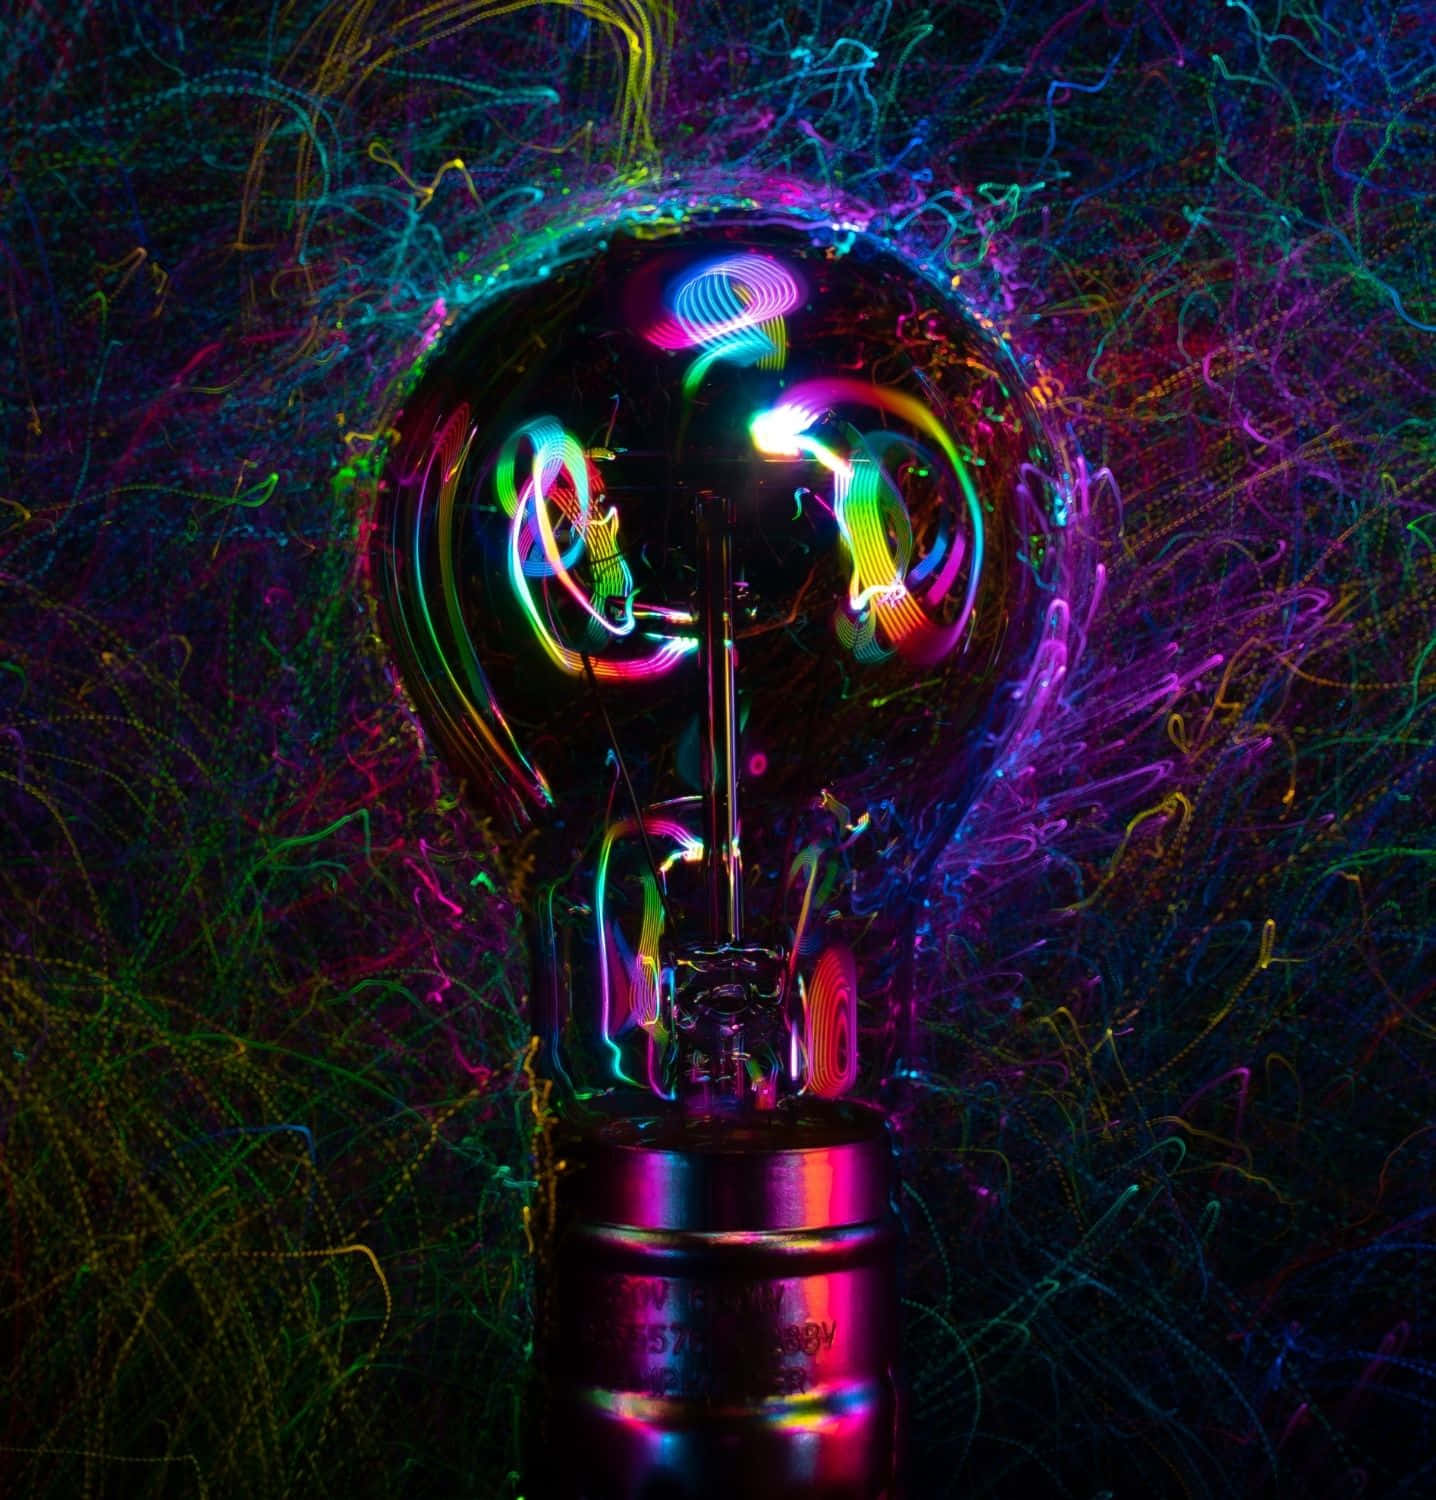 A light bulb illuminating with colorful gears and cogs inside Wallpaper